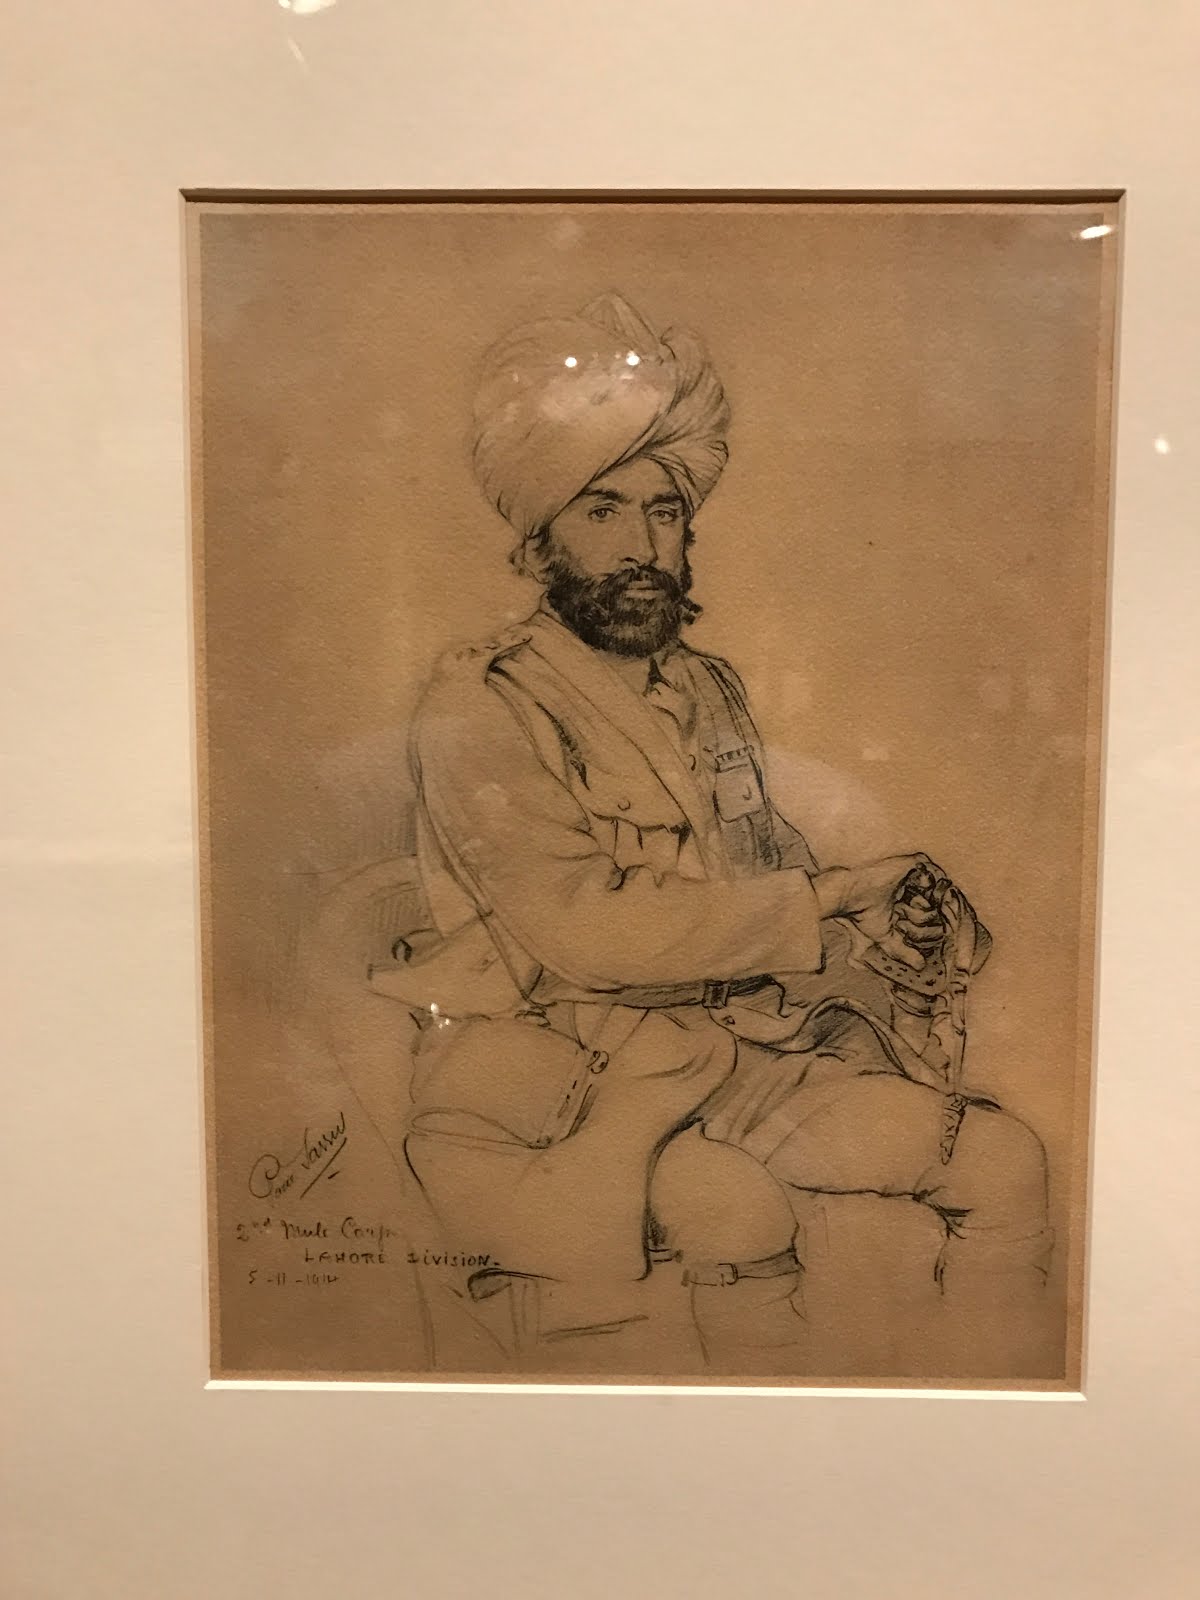 Story of the Sikhs told with respect and awe in exhibit at Phoenix Museum of Art.